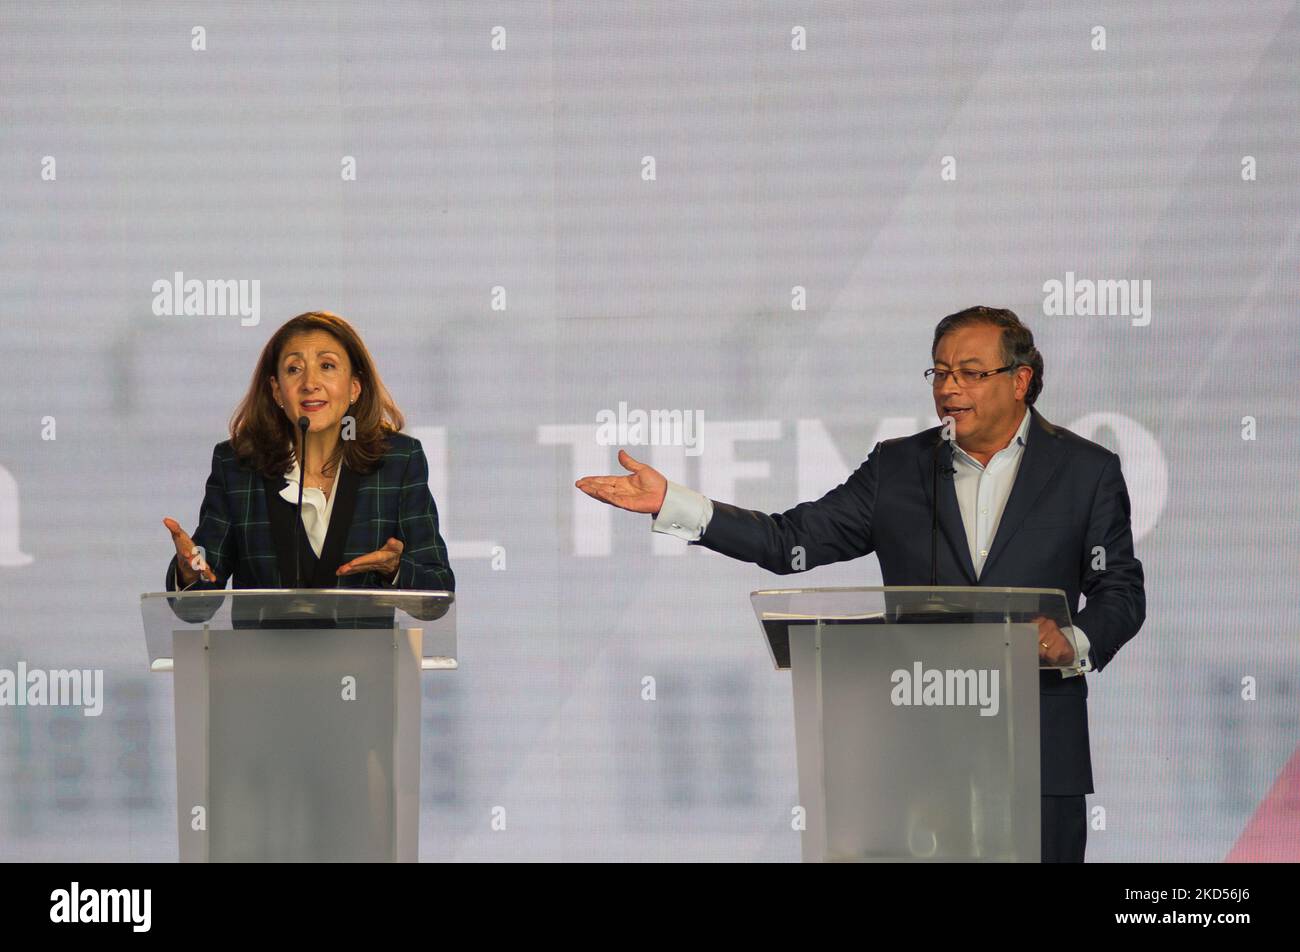 Presidential candidate franch-colombian Ingrid Betancourt for political party 'Partido Verde Oxigeno' argues with leftist candidate for 'Pacto Historico' Gustavo Petro during the first debate after the preliminary elections in Bogota, Colombia, on March 14, 2022. Petro, from the leftist coalition 'Pacto Historico' won the most votes during the preliminary consultation during the congressional elections. (Photo by Sebastian Barros/NurPhoto) Stock Photo